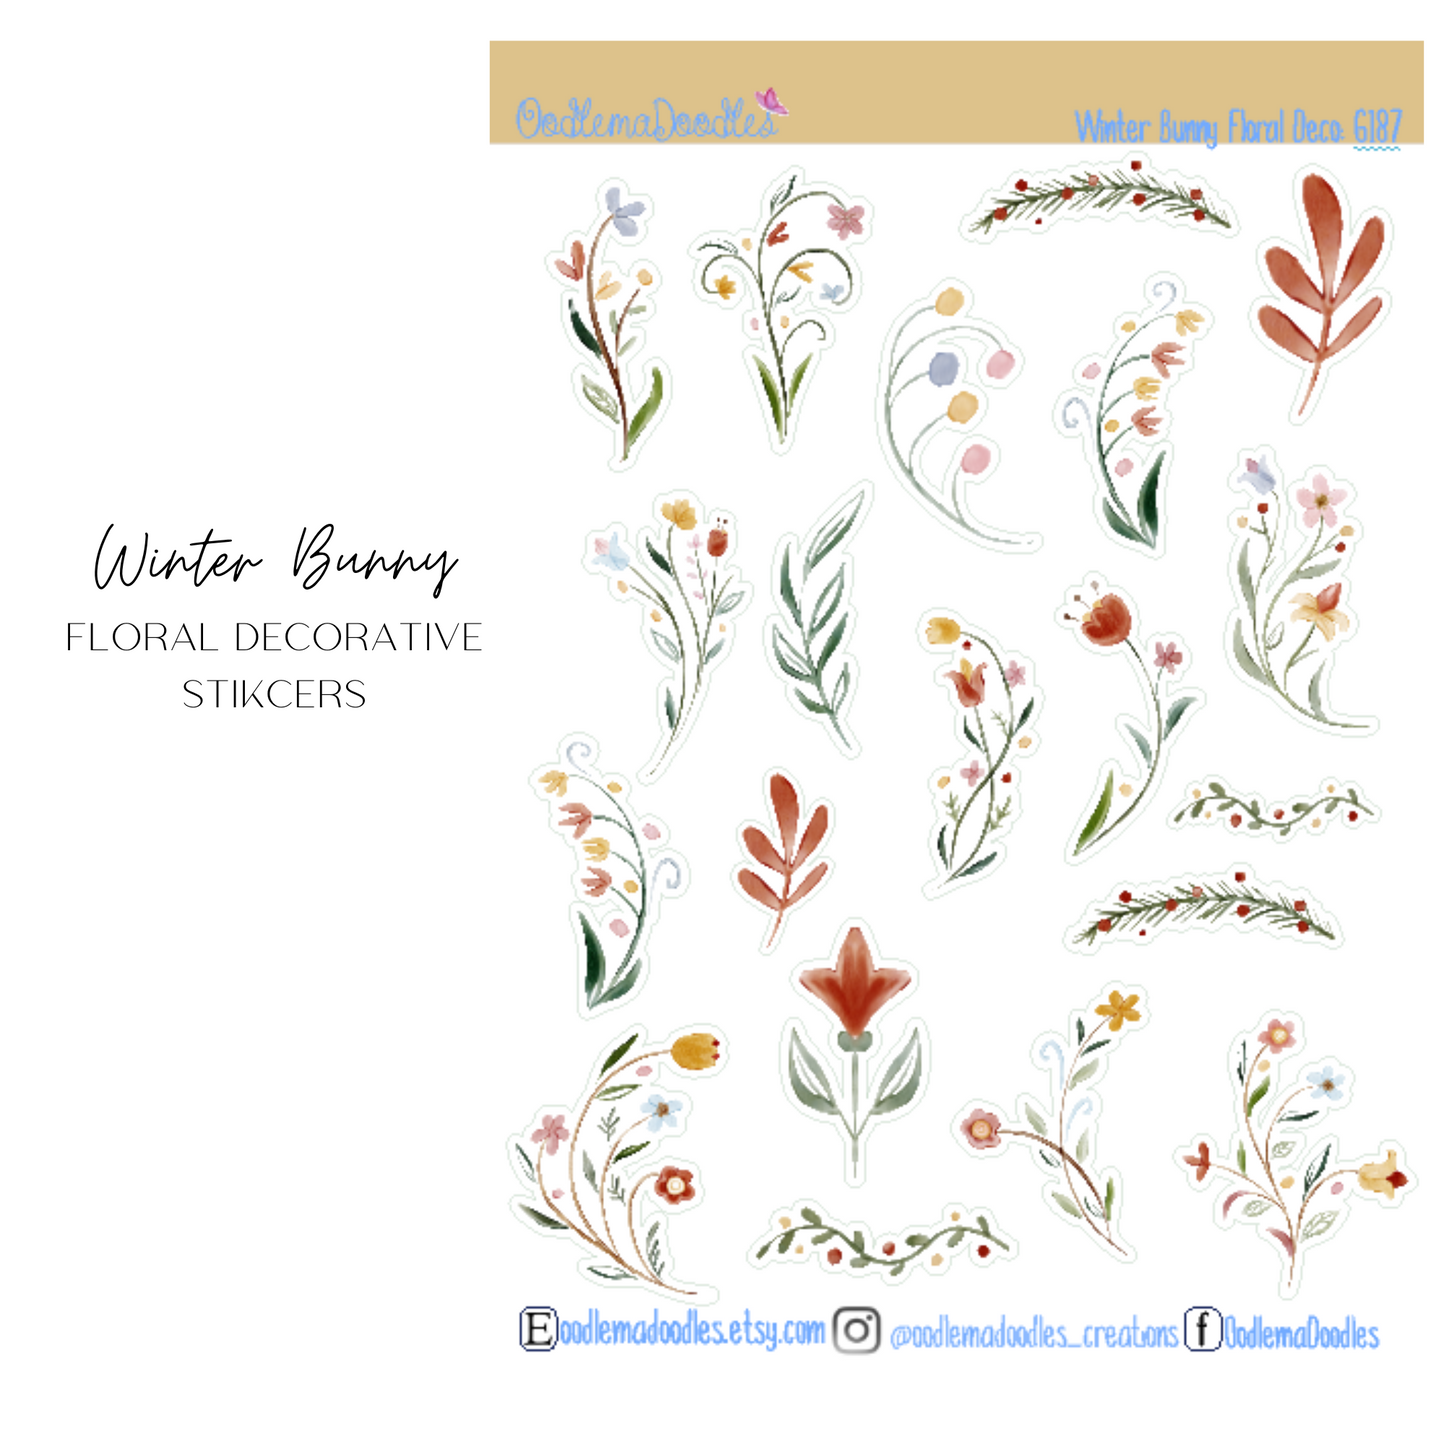 Winter Bunny Floral Decorative Stickers